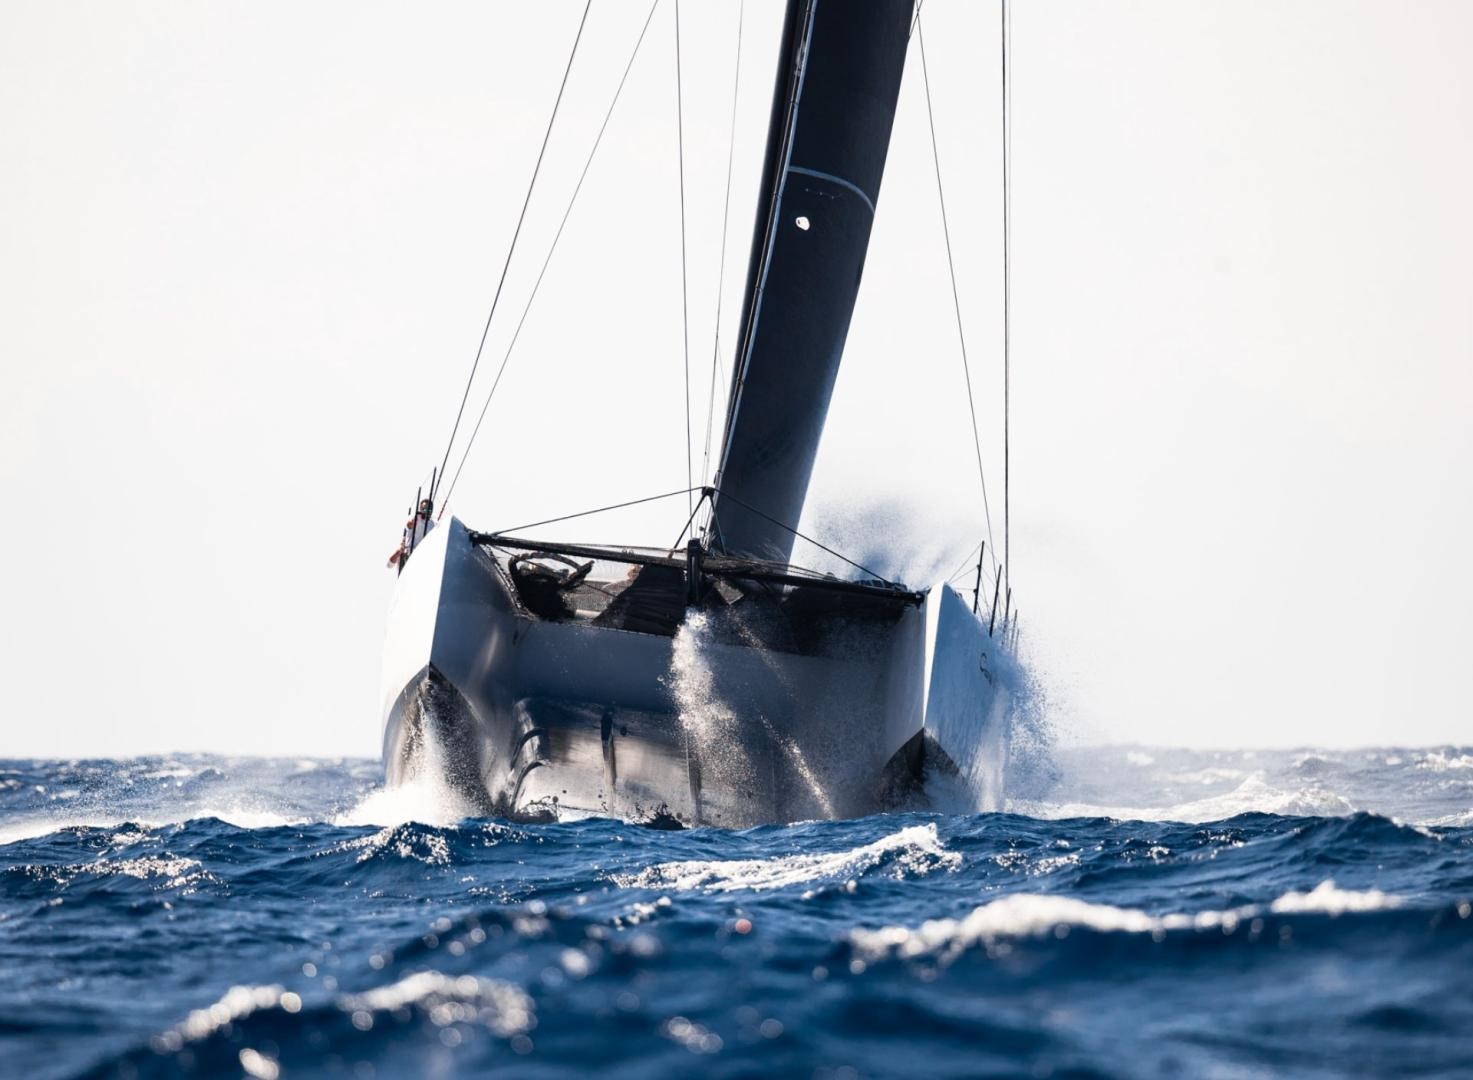 Excitement at the Multihull Cup increases along with the breeze